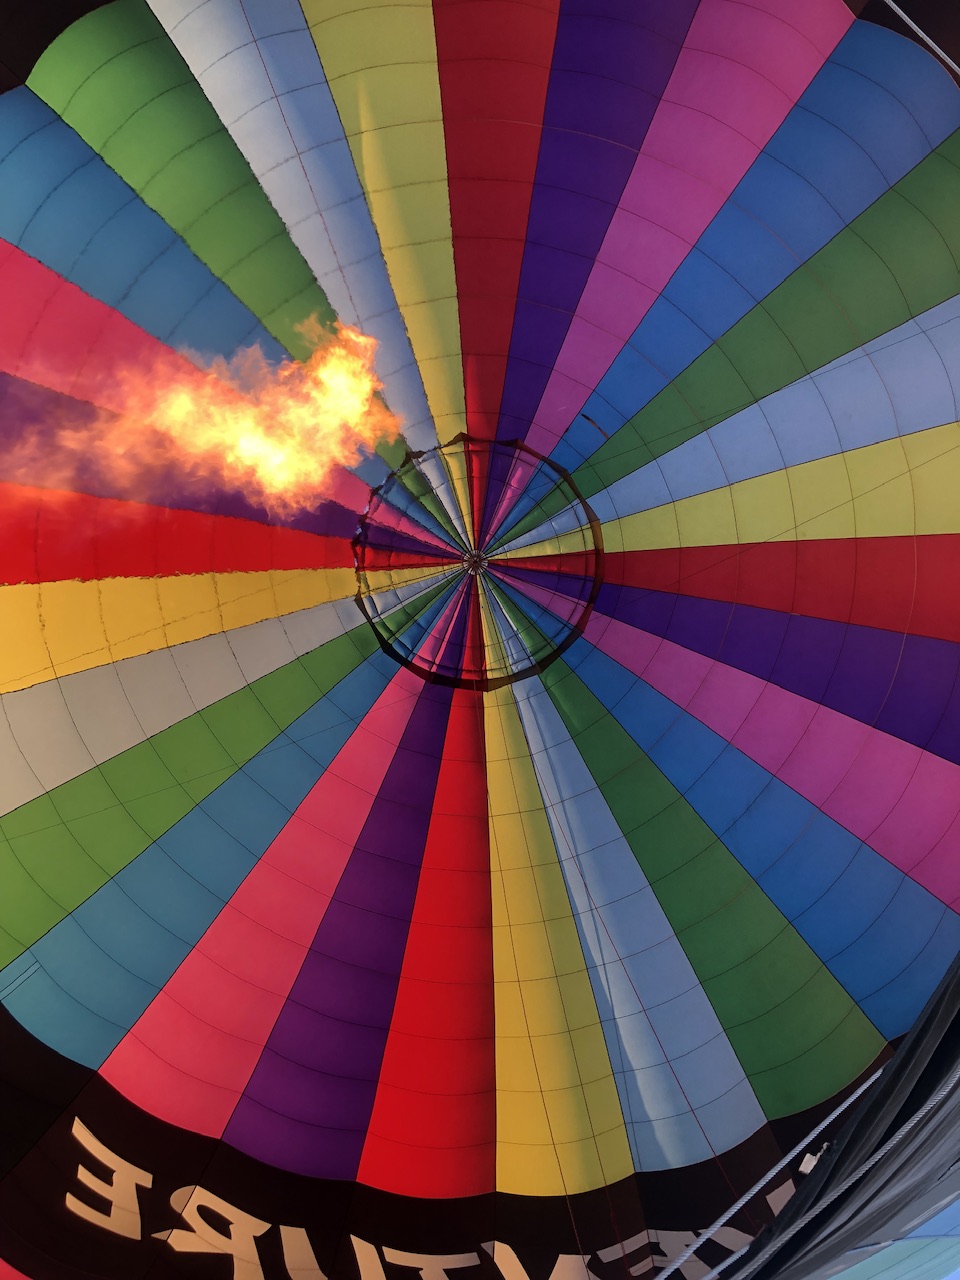 Looking up from hot air balloon basket into colourful inflated hot air balloon. Flames can be seen firing into the balloon.